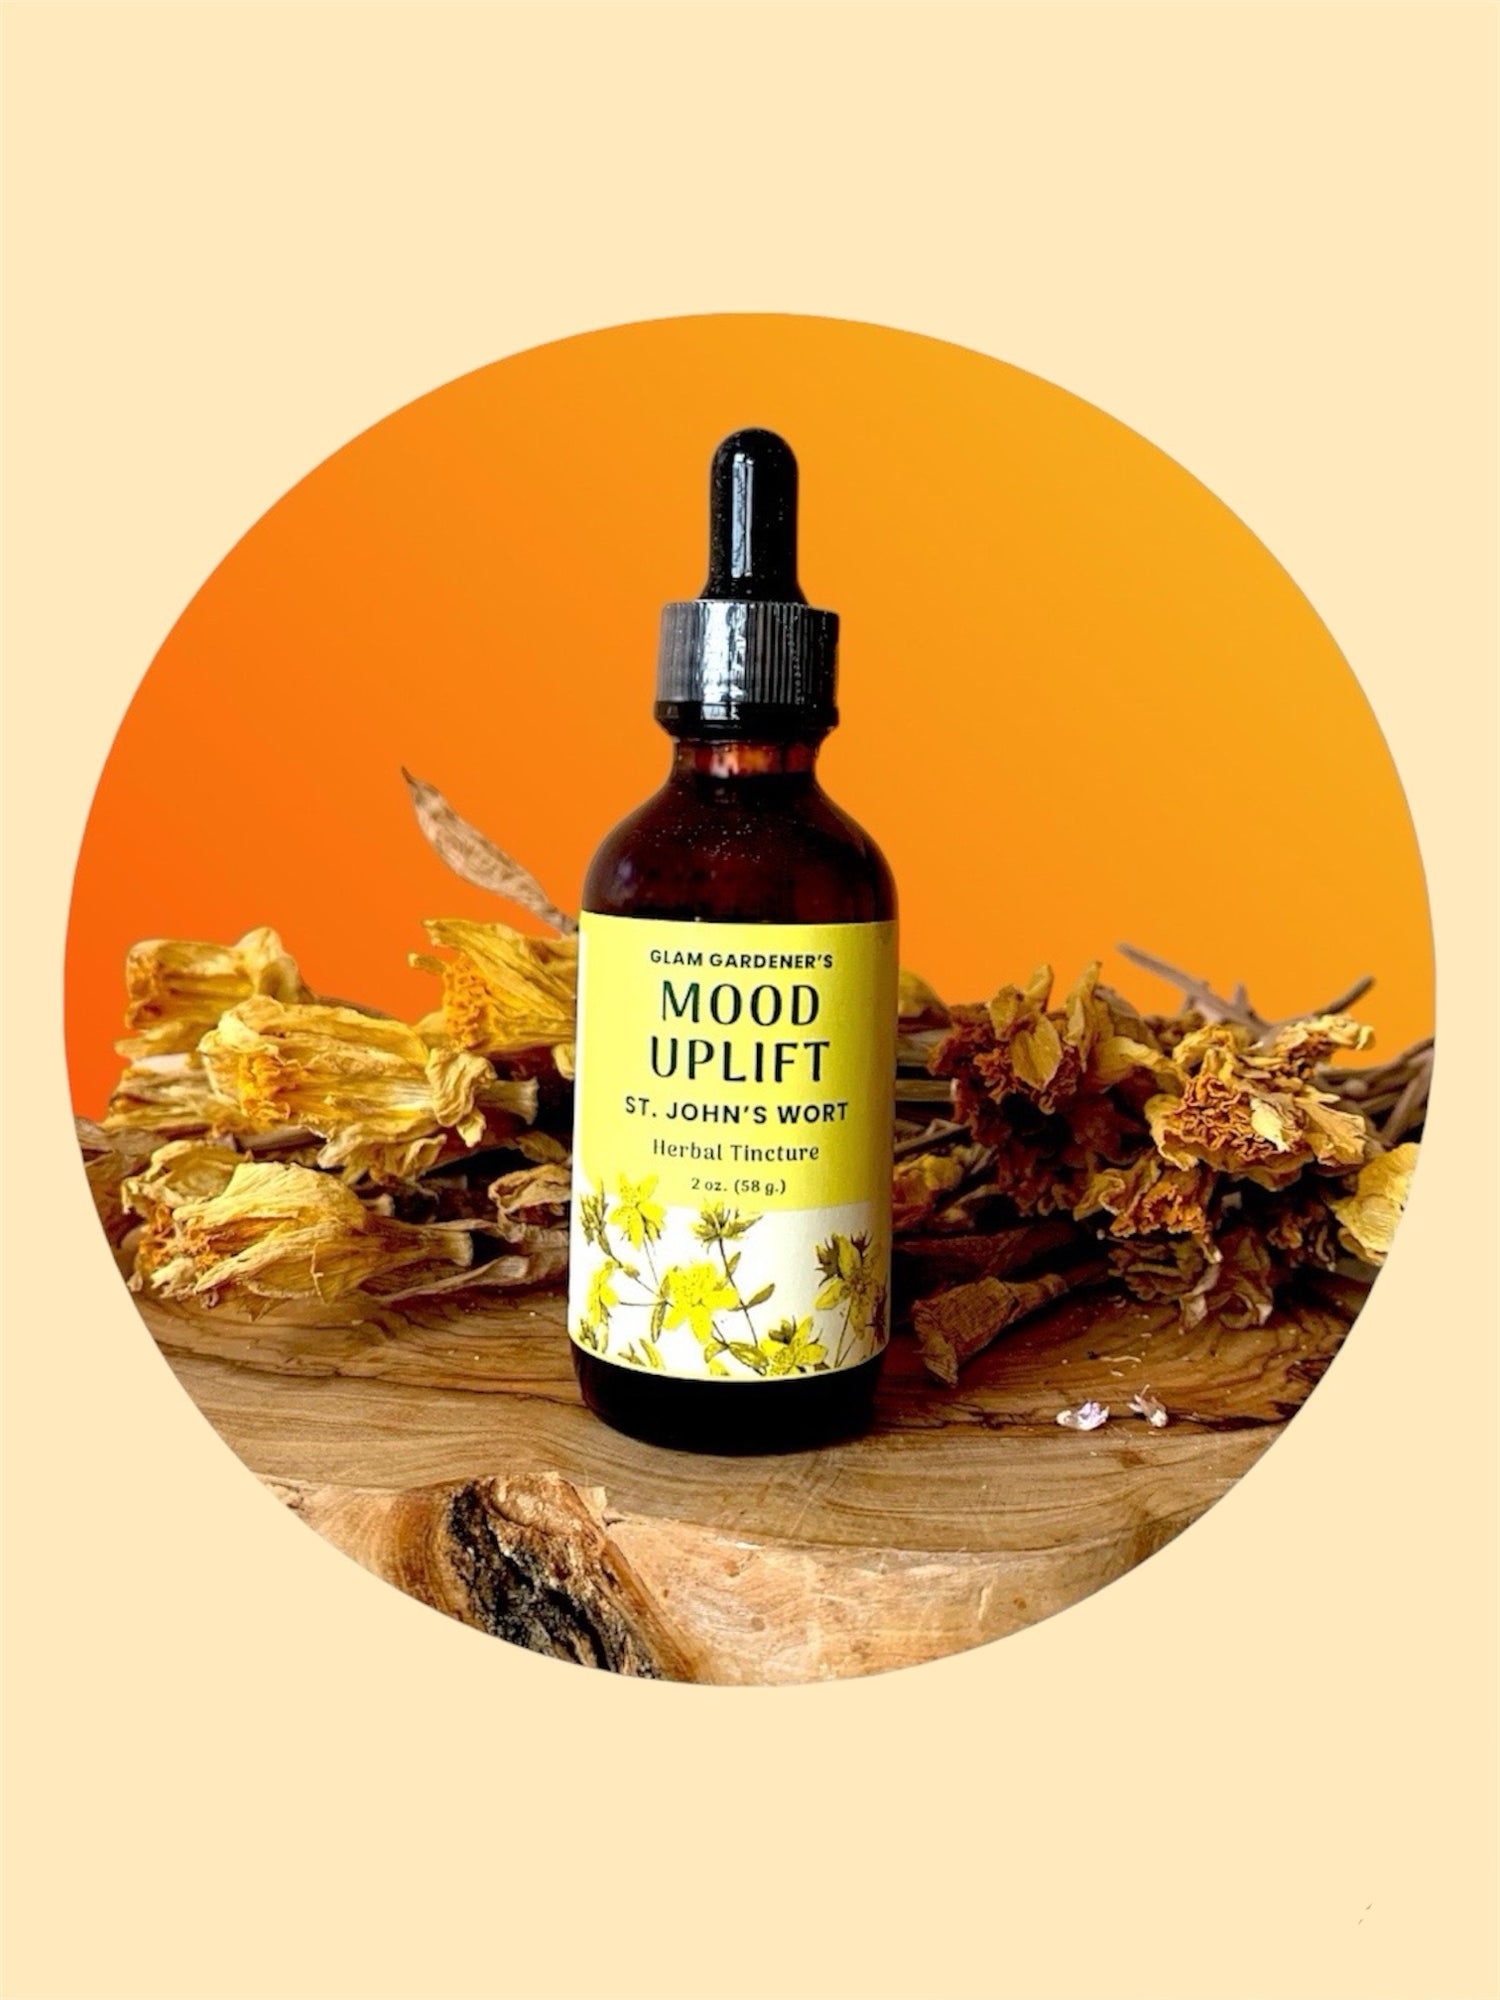 St John's wort wildcrafted herbal tincture by Glam Gardener NYC harvested in New York, New Jersey and Pennsylvania, organic herbal tincture for mood